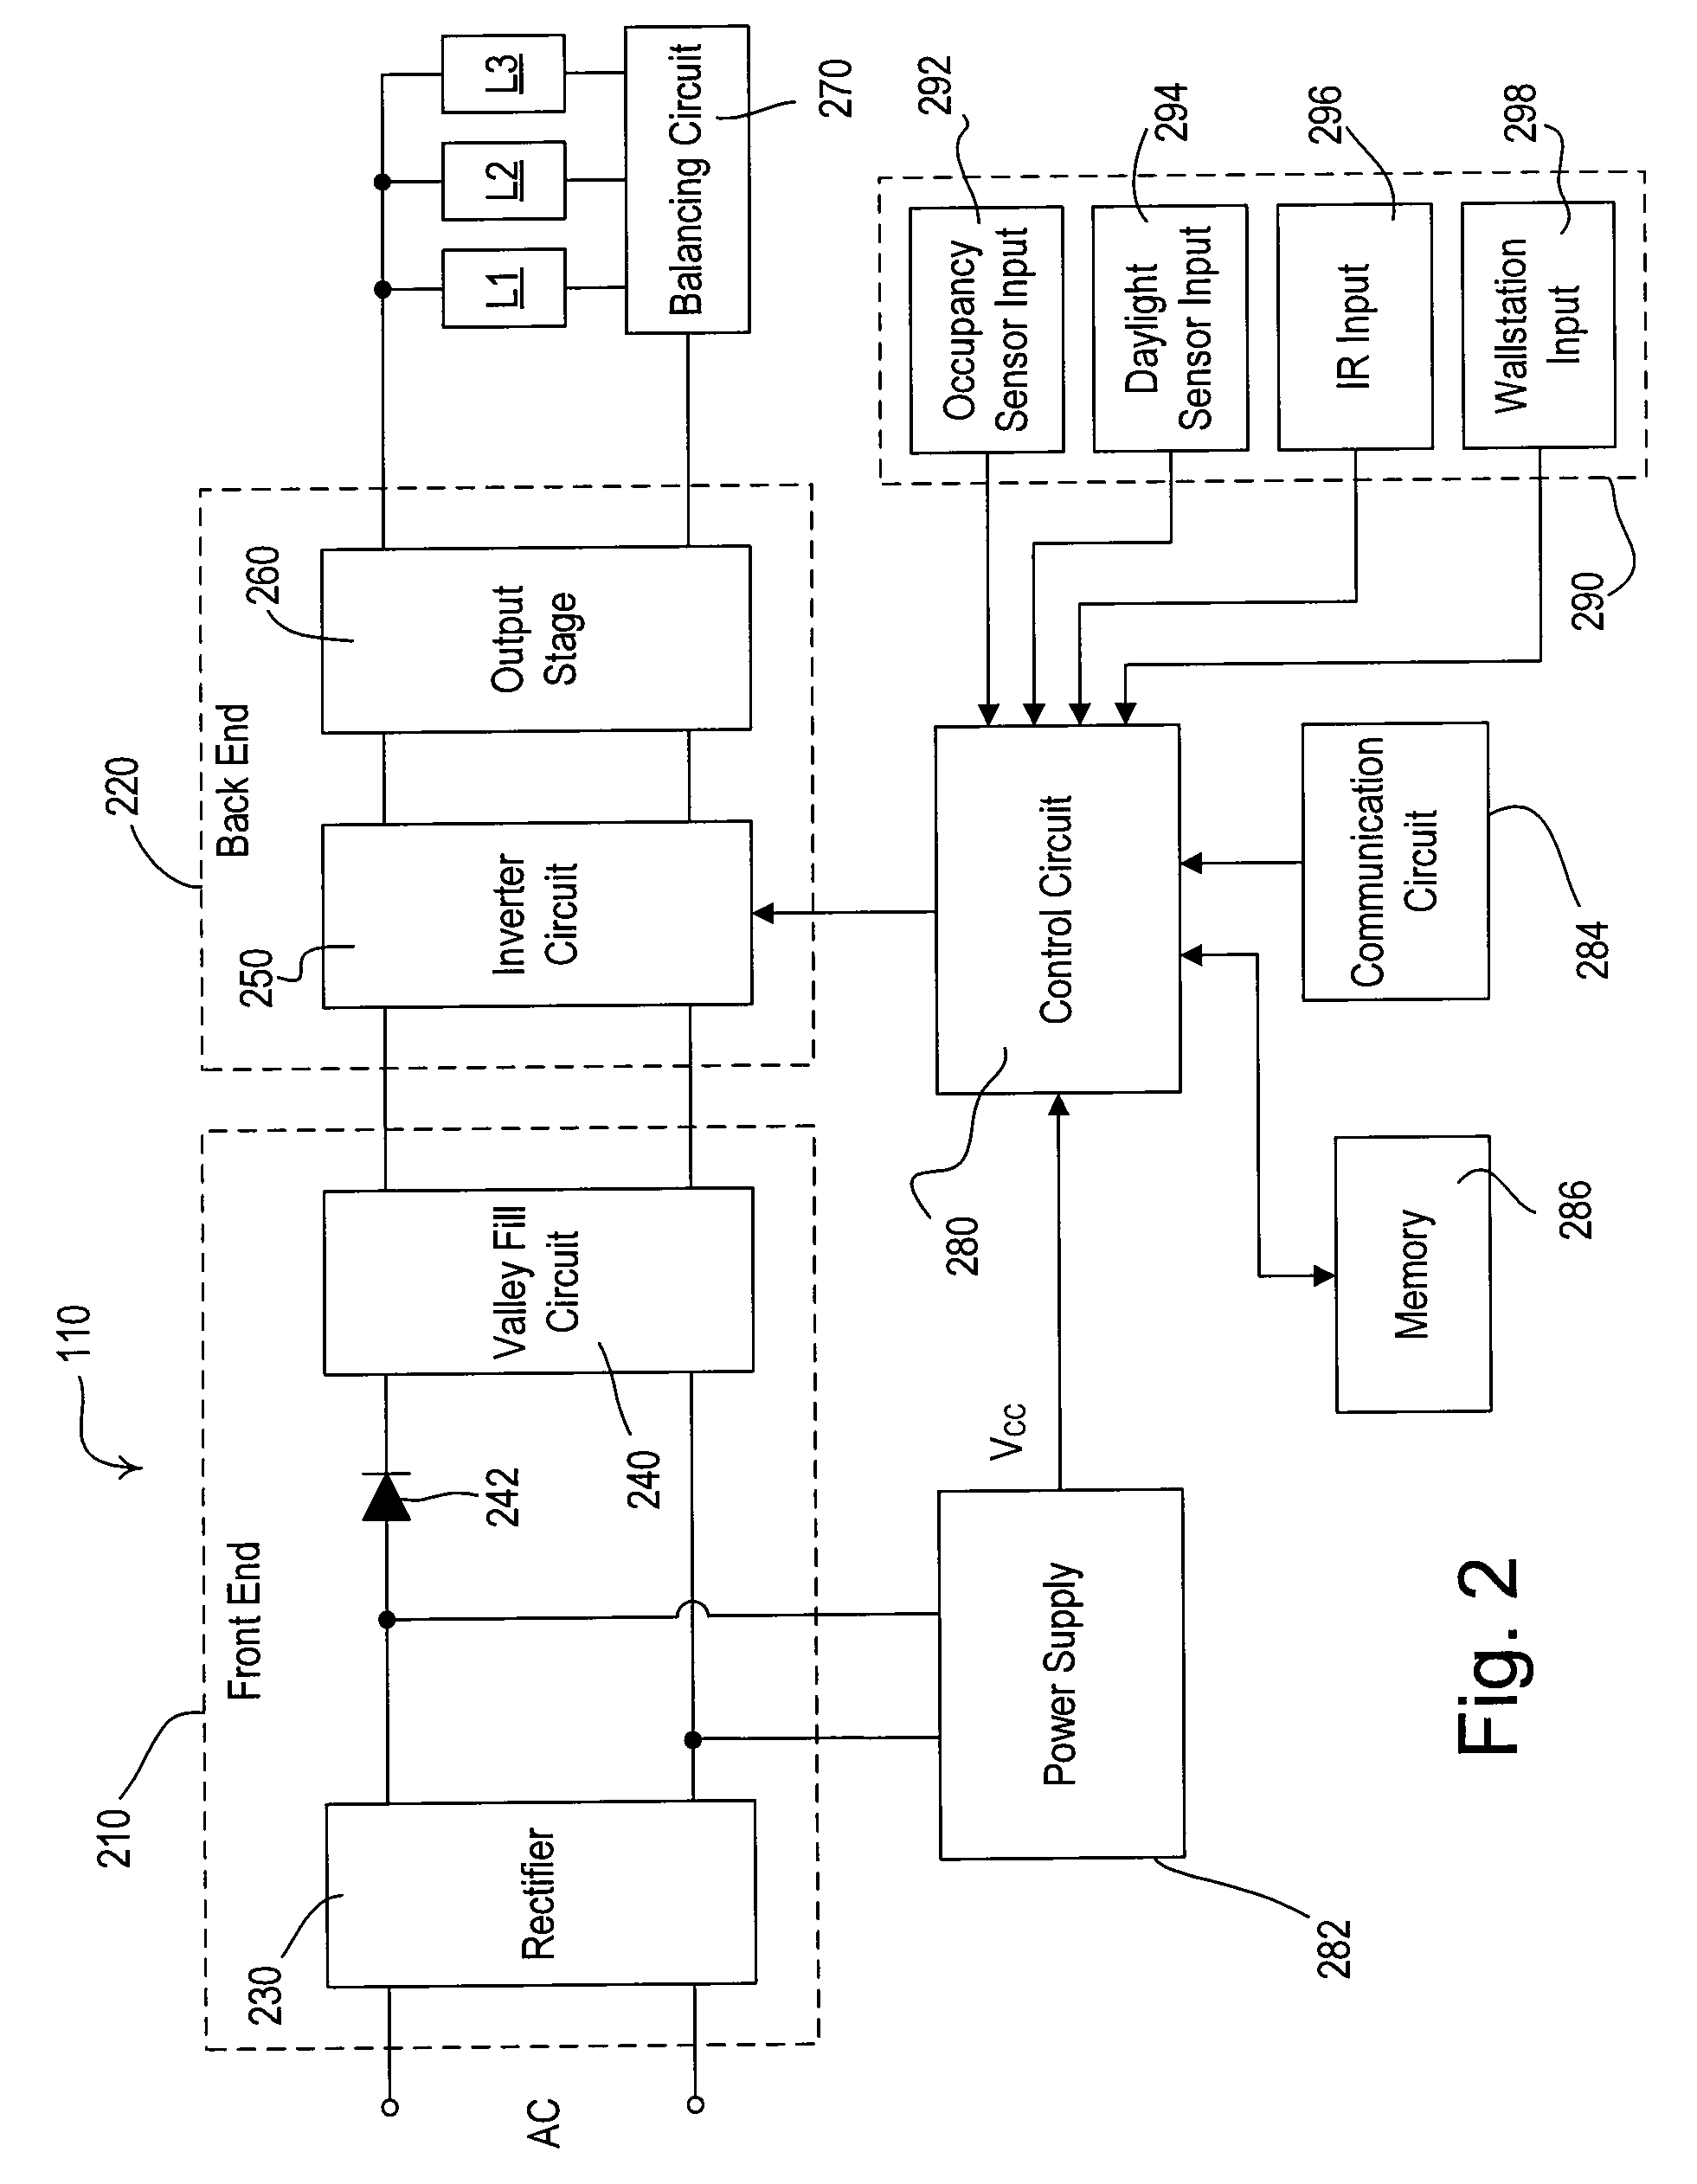 Method of load shedding to reduce the total power consumption of a load control system